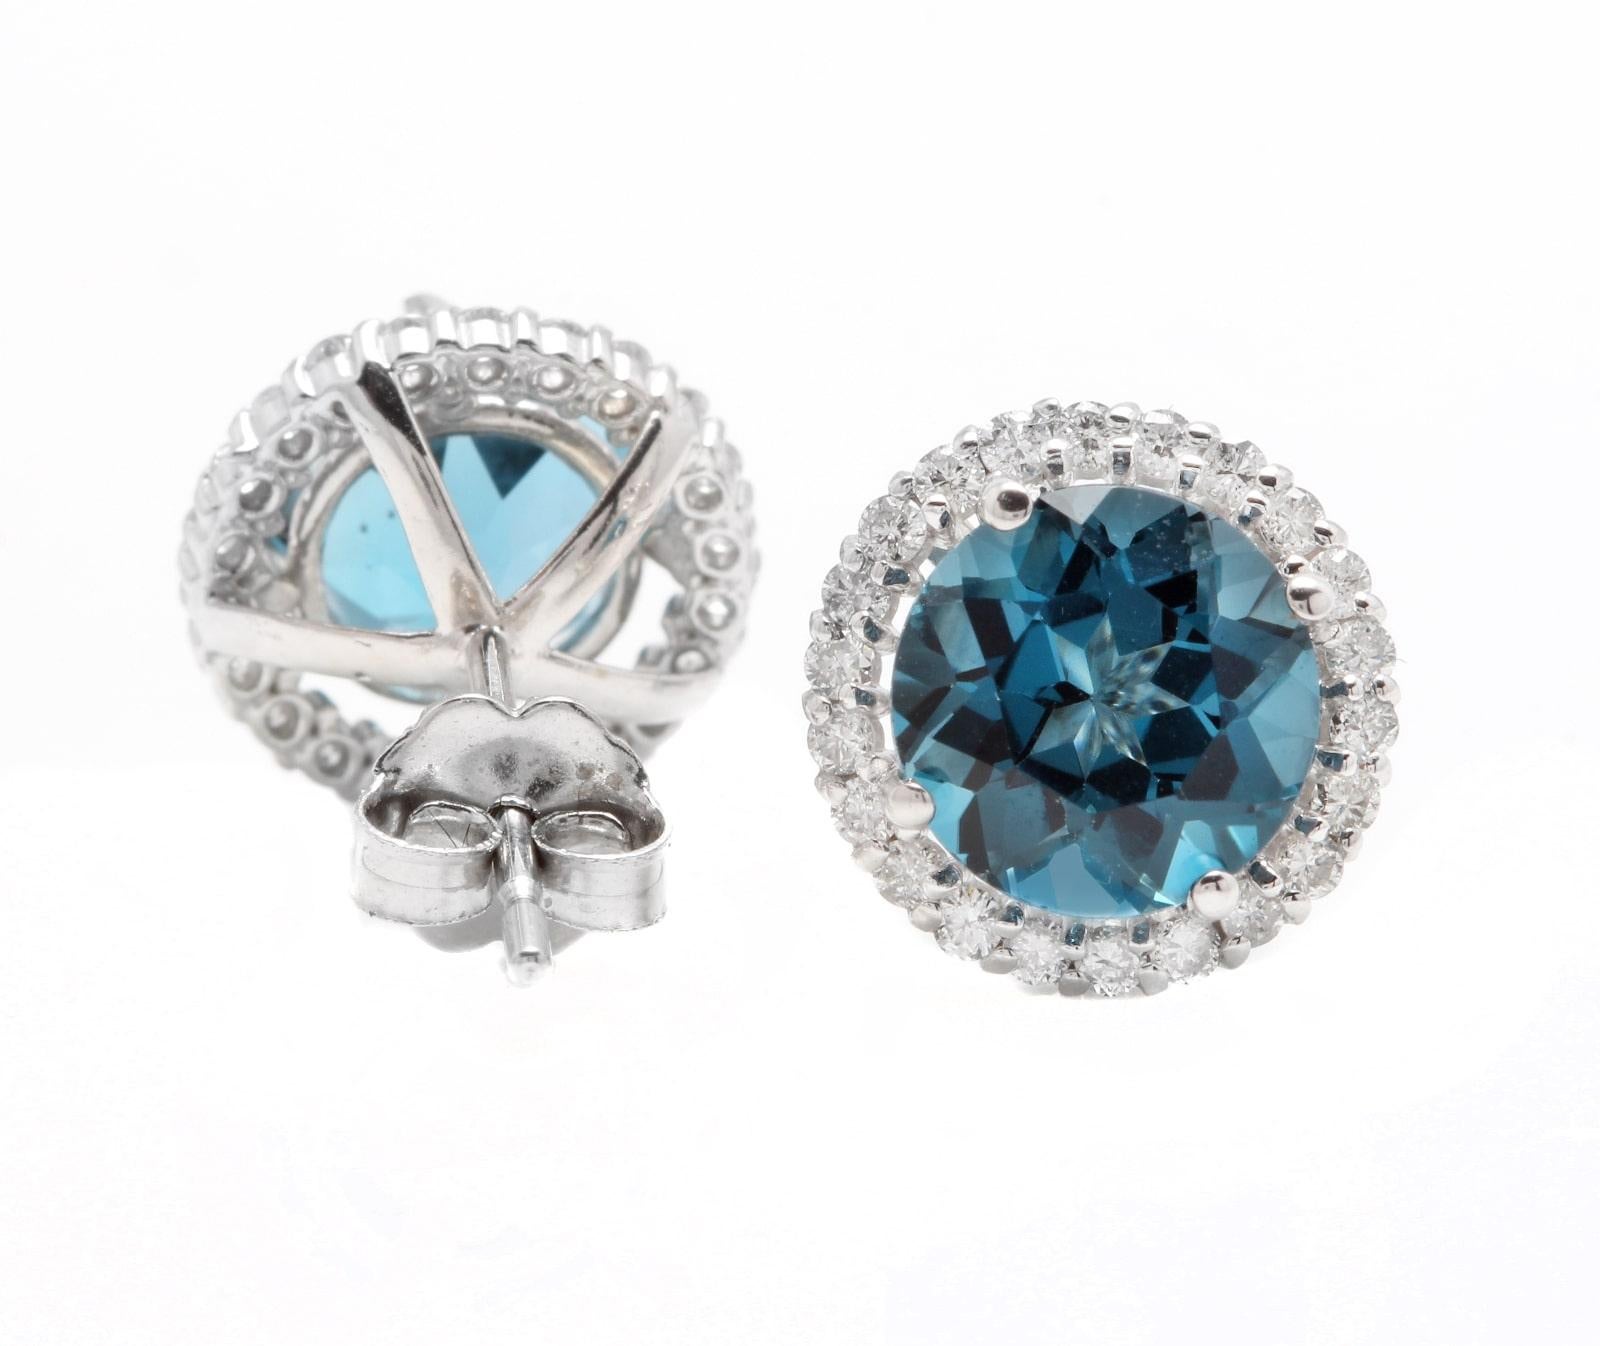 5.00 Carats Natural London Blue Topaz and Diamond 14K Solid White Gold Stud Earrings

Amazing looking piece!

Total Natural Round Cut White Diamonds Weight: 0.50 Carats (color G-H / Clarity SI1-SI2)

Total Natural Round Cut London Blue Topazes